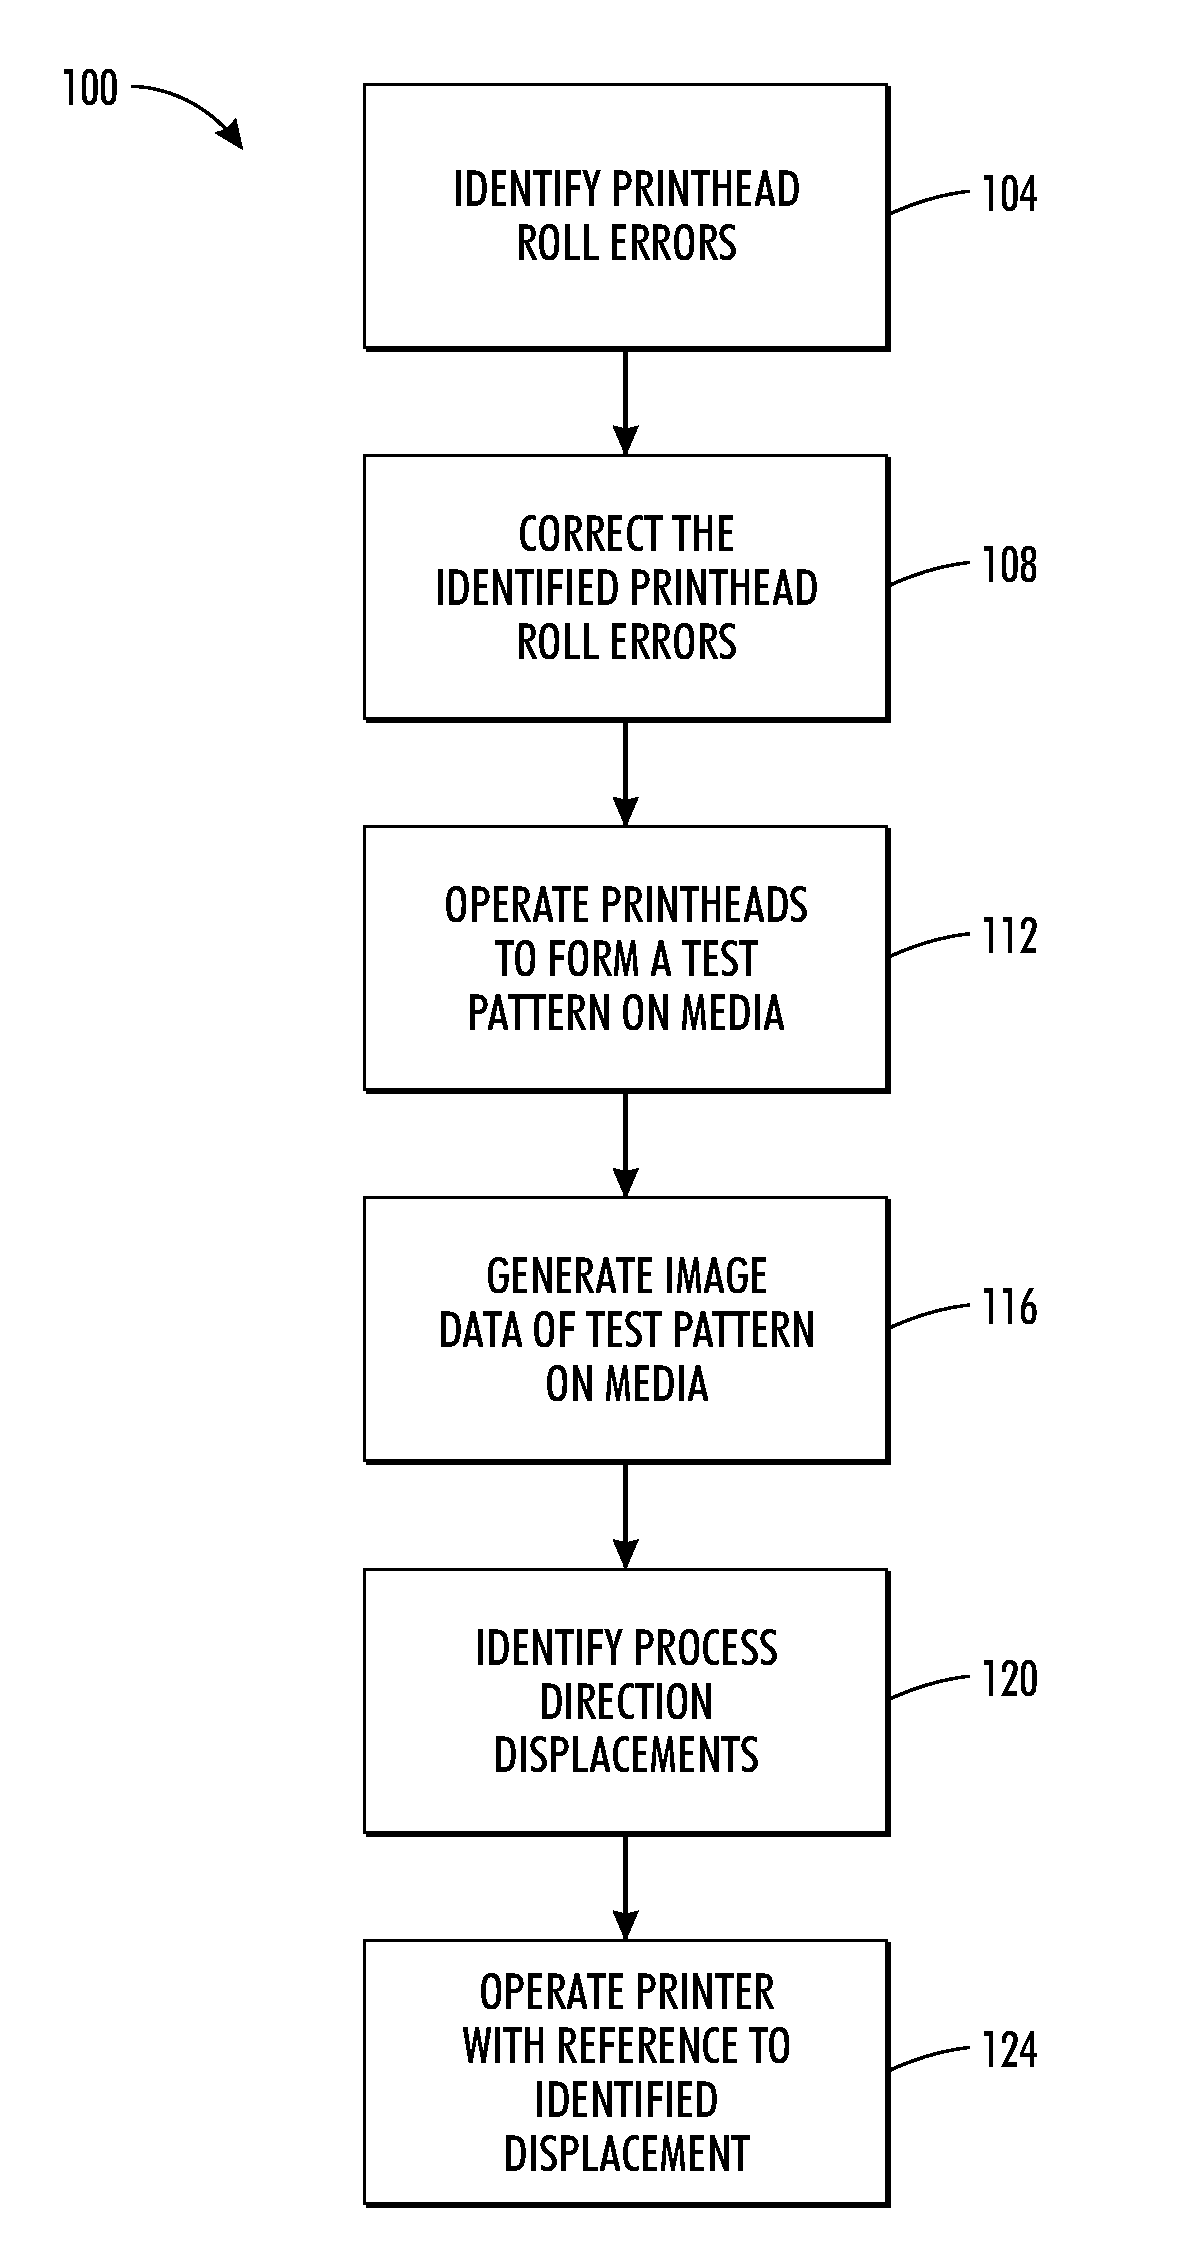 Method And System For Measuring And Compensating For Process Direction Artifacts In An Optical Imaging System In An Inkjet Printer